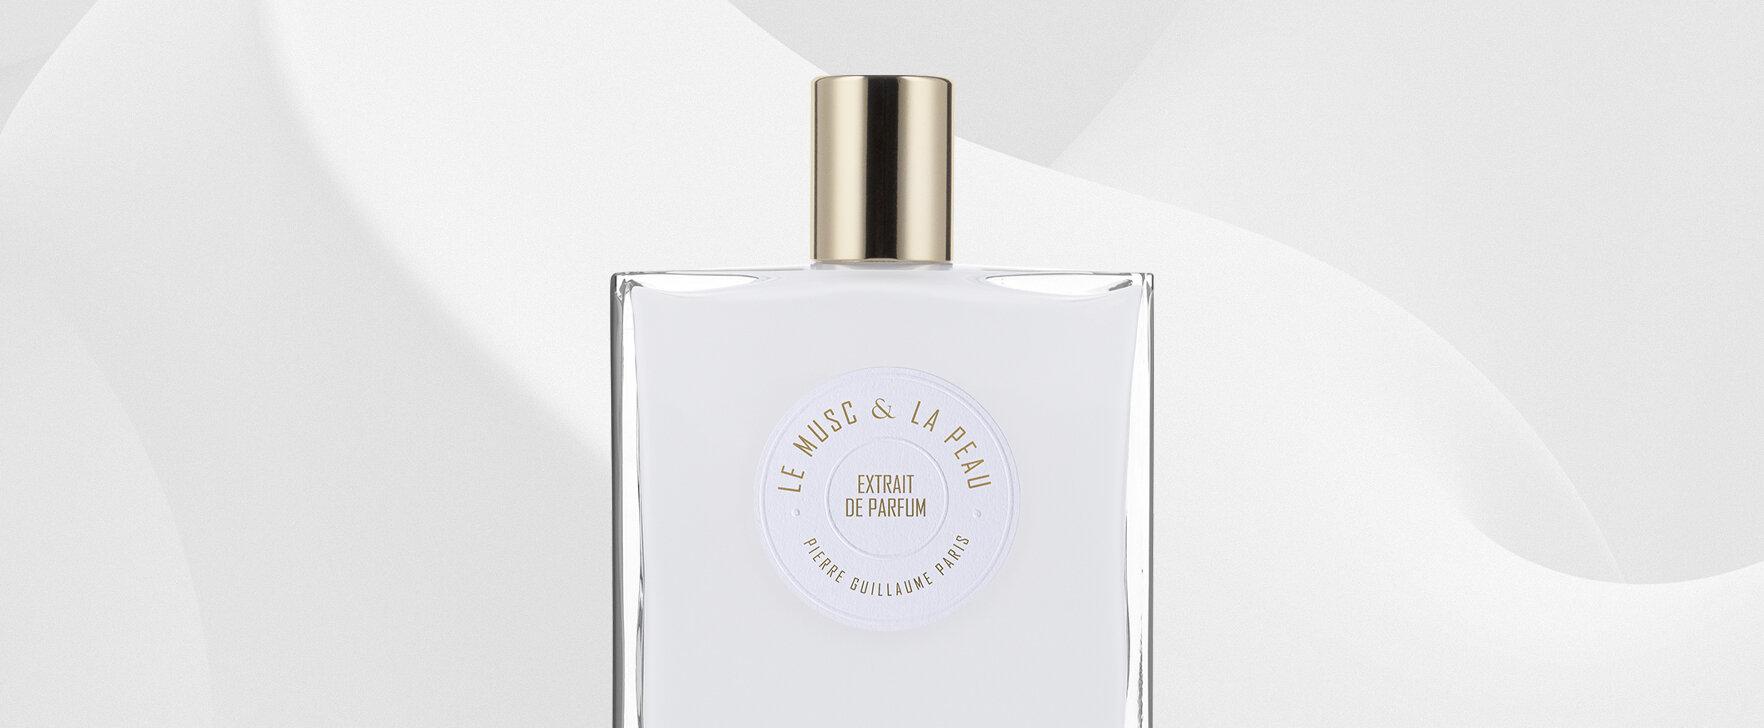 An Ode to the Sensuality of the Skin: the New Extrait de Parfum "Le Musc & la Peau" by Pierre Guillaume